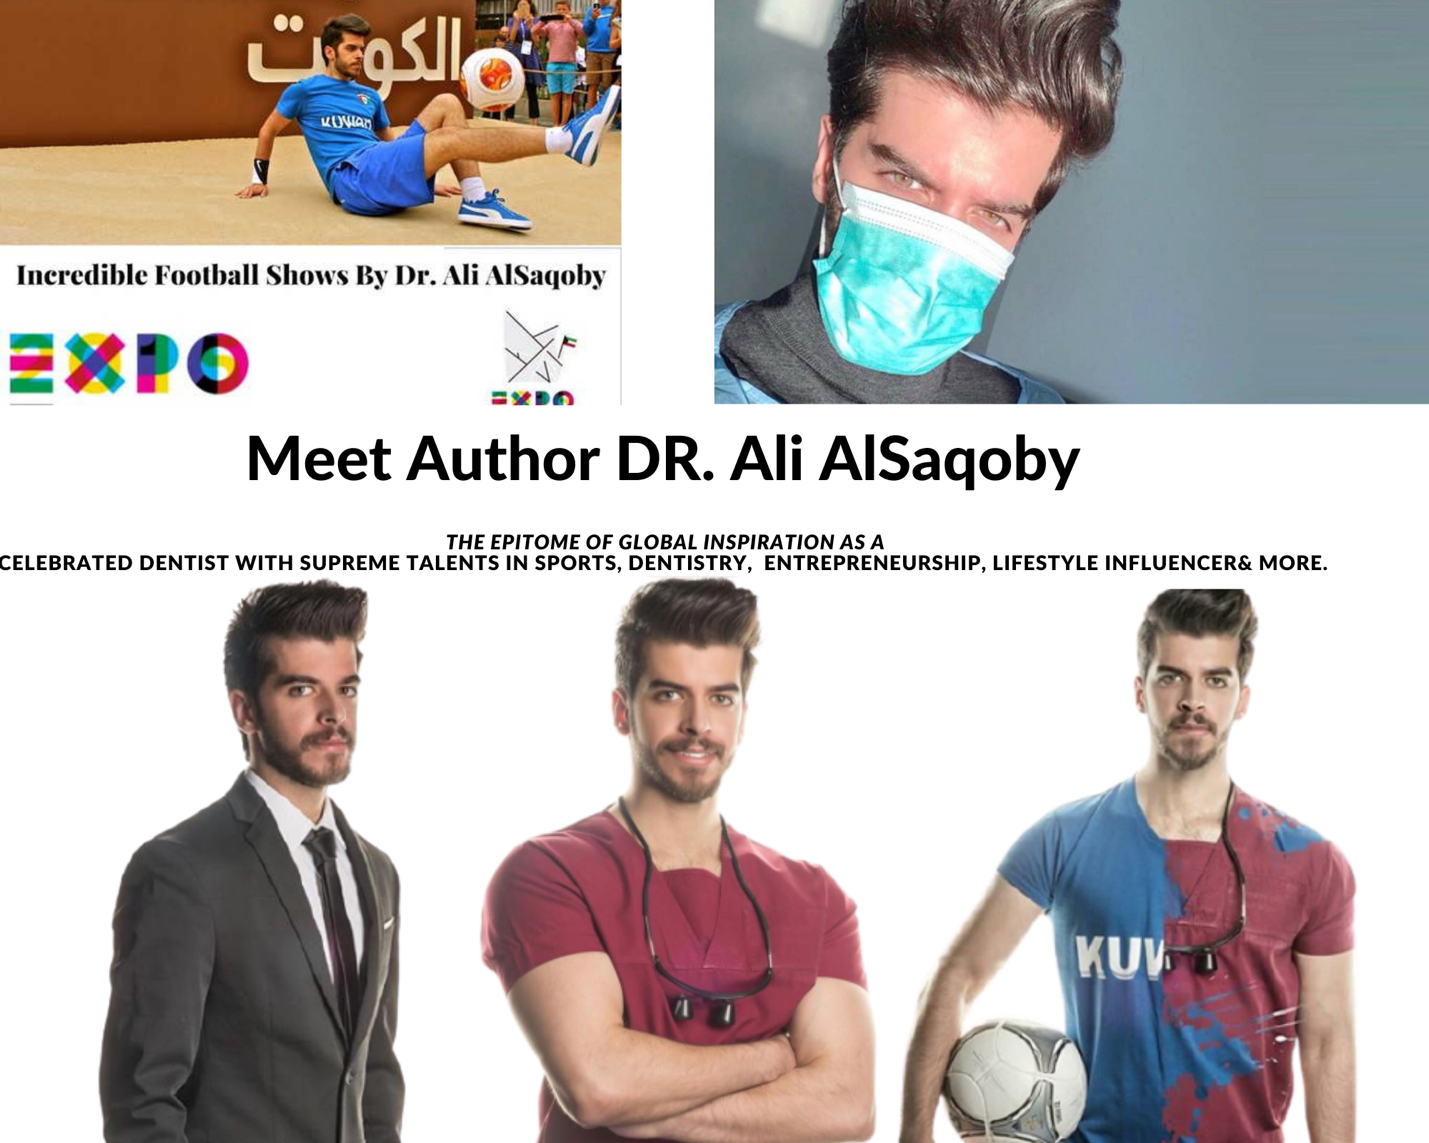 Author Dr. Ali AlSaqoby Is The Epitome Of Global Inspiration As a Celebrated Dentist With Supreme Talents in Sports & More